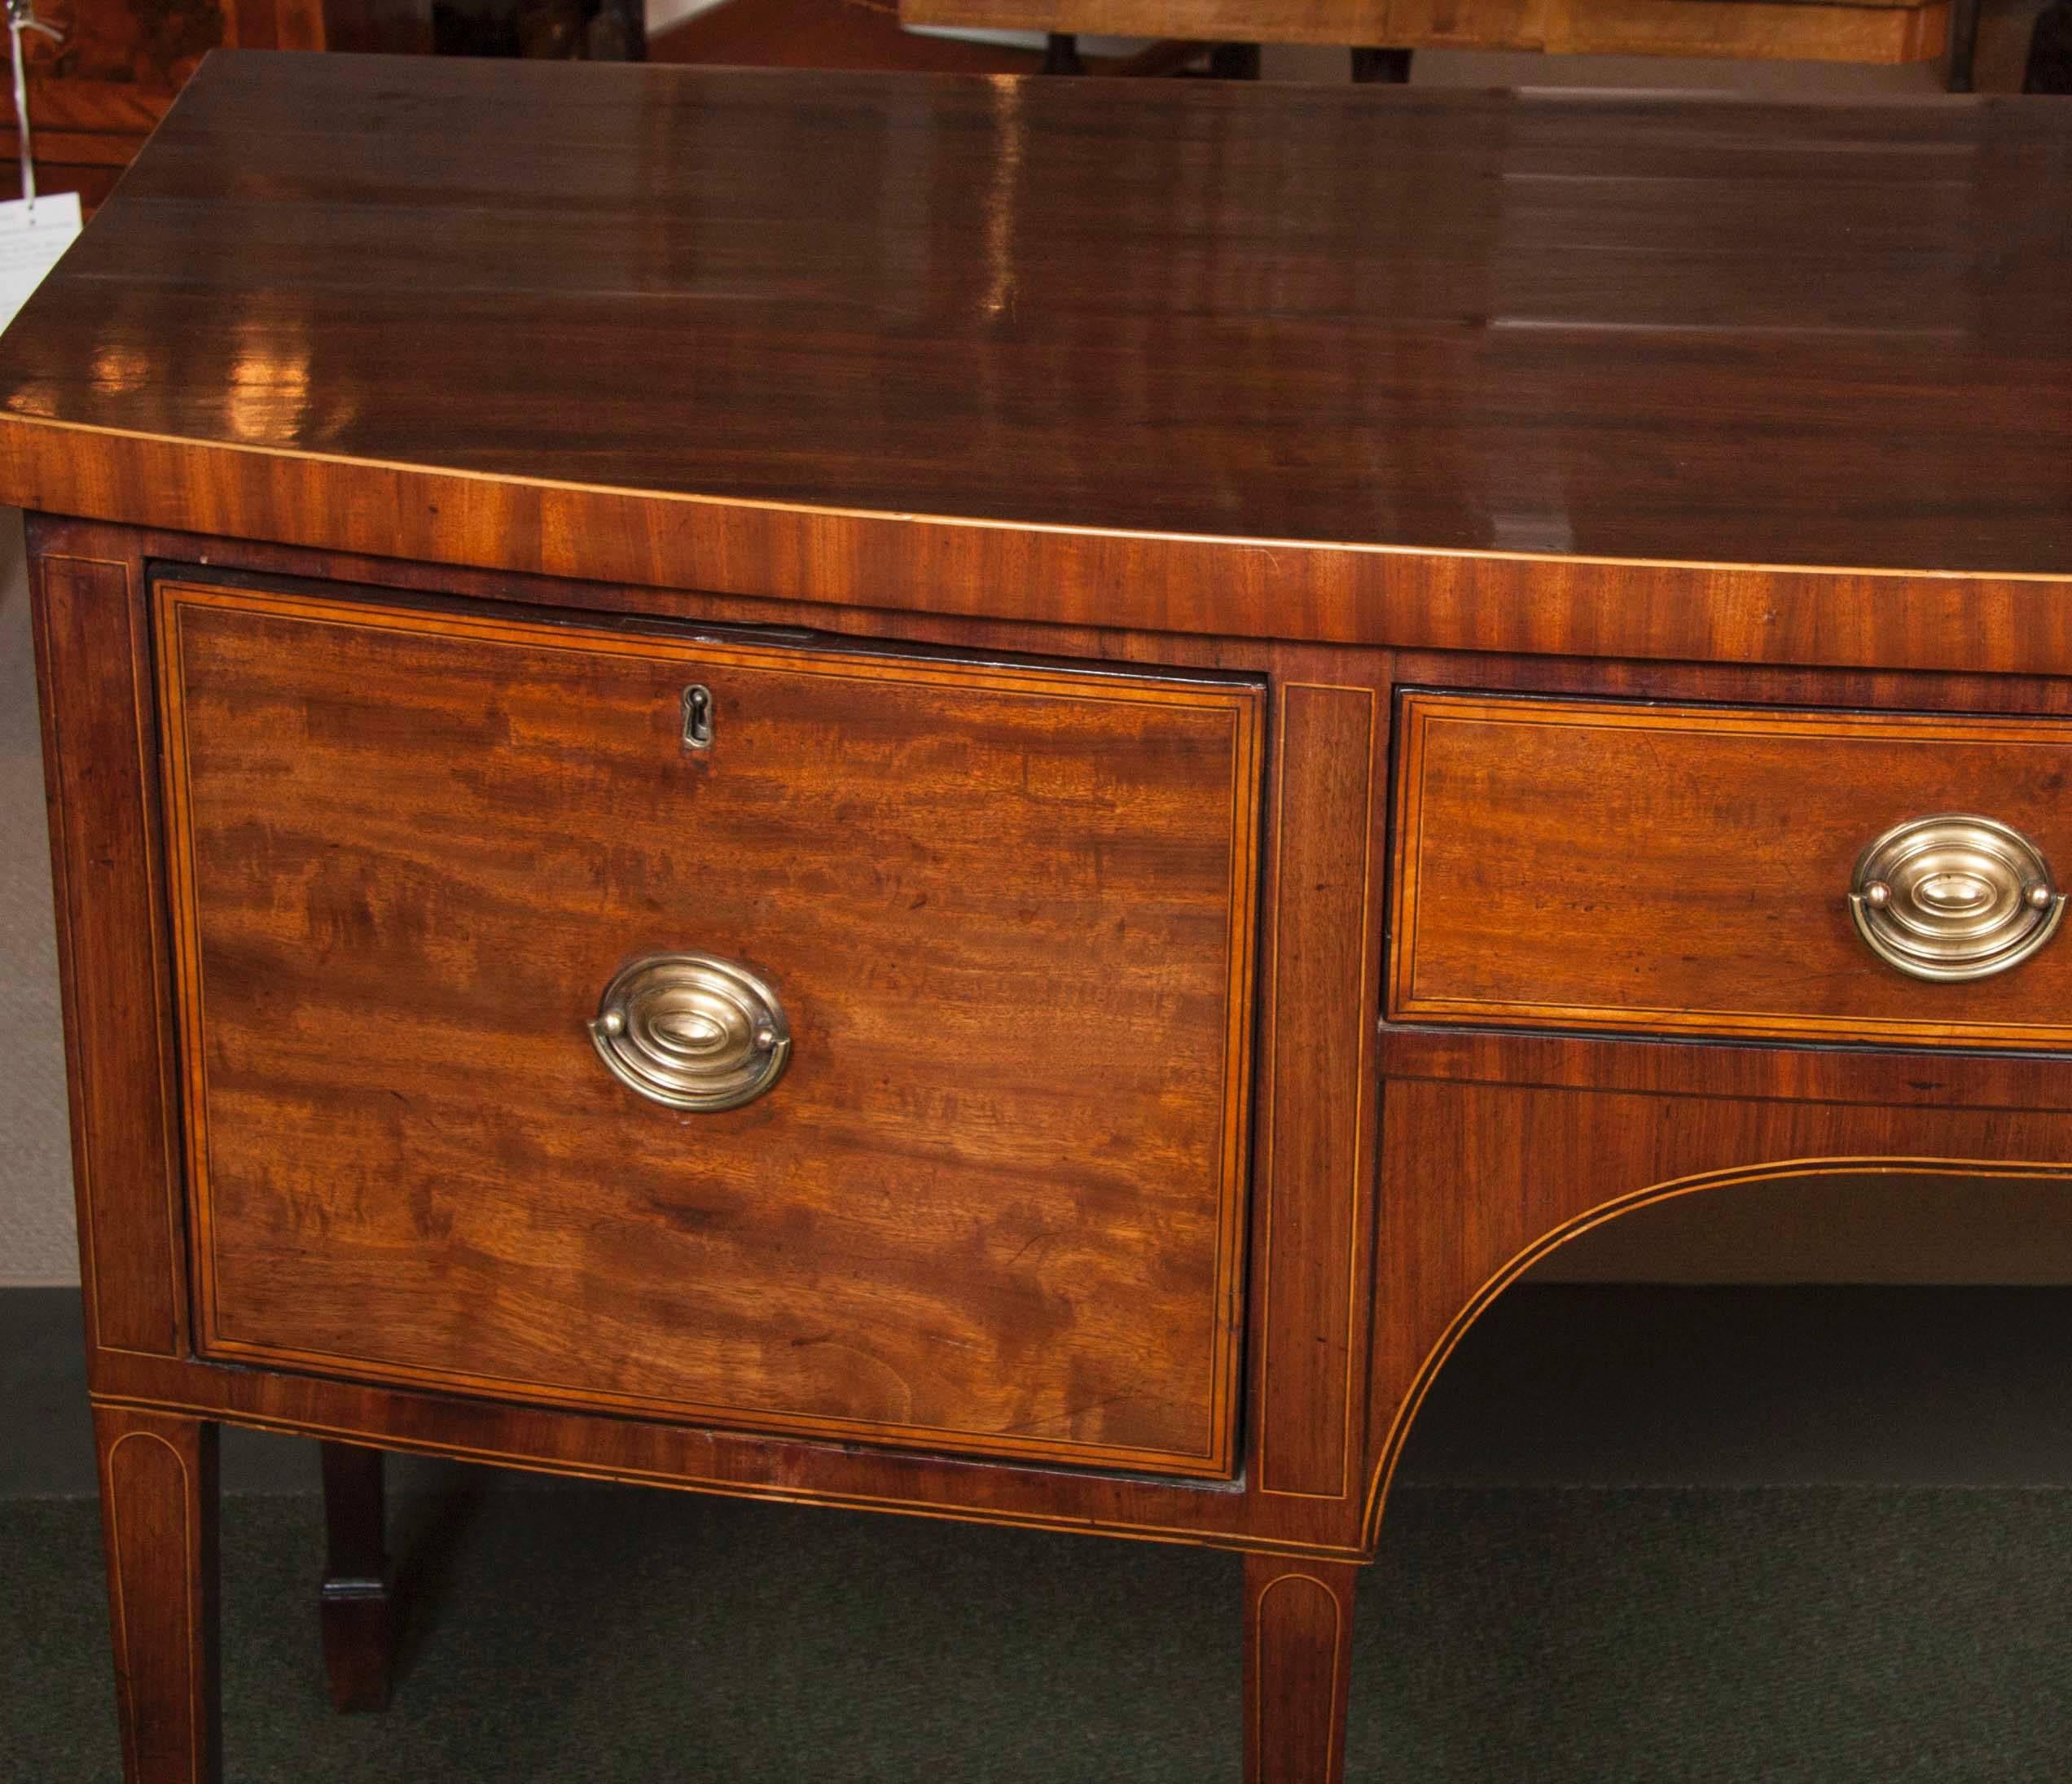 Bow fronted with a long drawer flanked by two deep drawers raised on square tapered legs and spade feet.